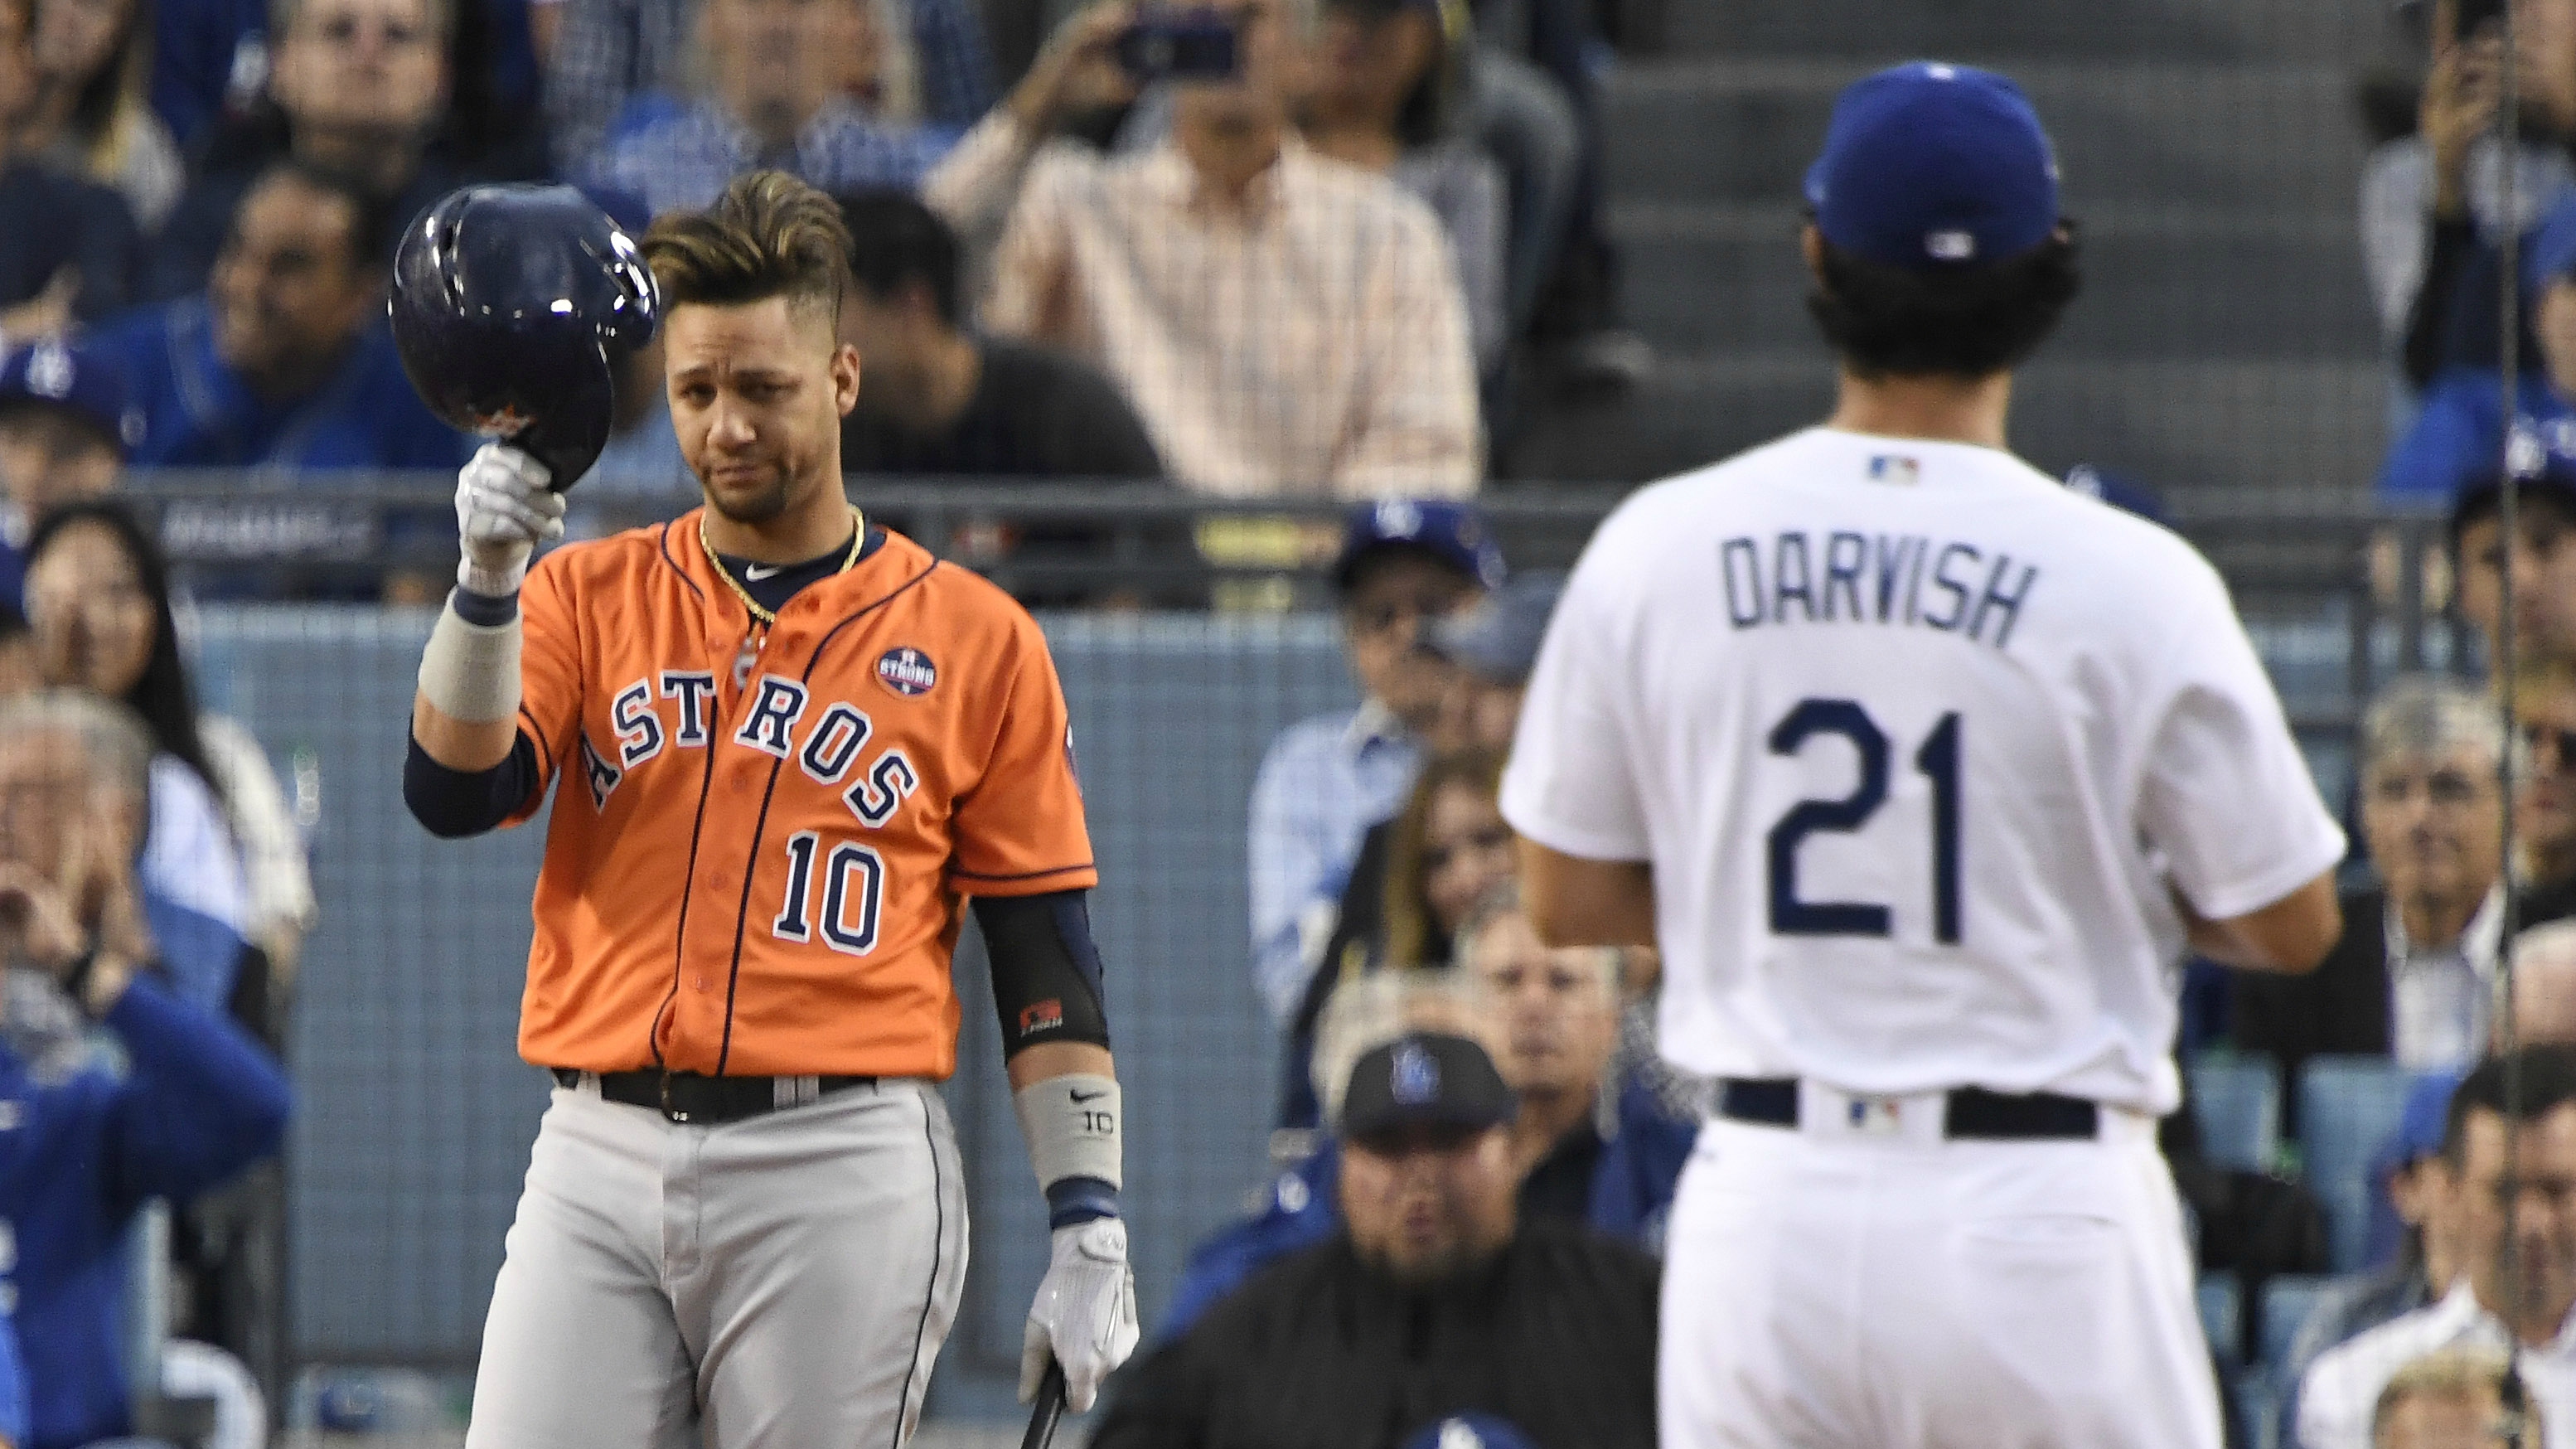 Yuli Gurriel tips his cap to Yu Darvish after racist gesture controversy